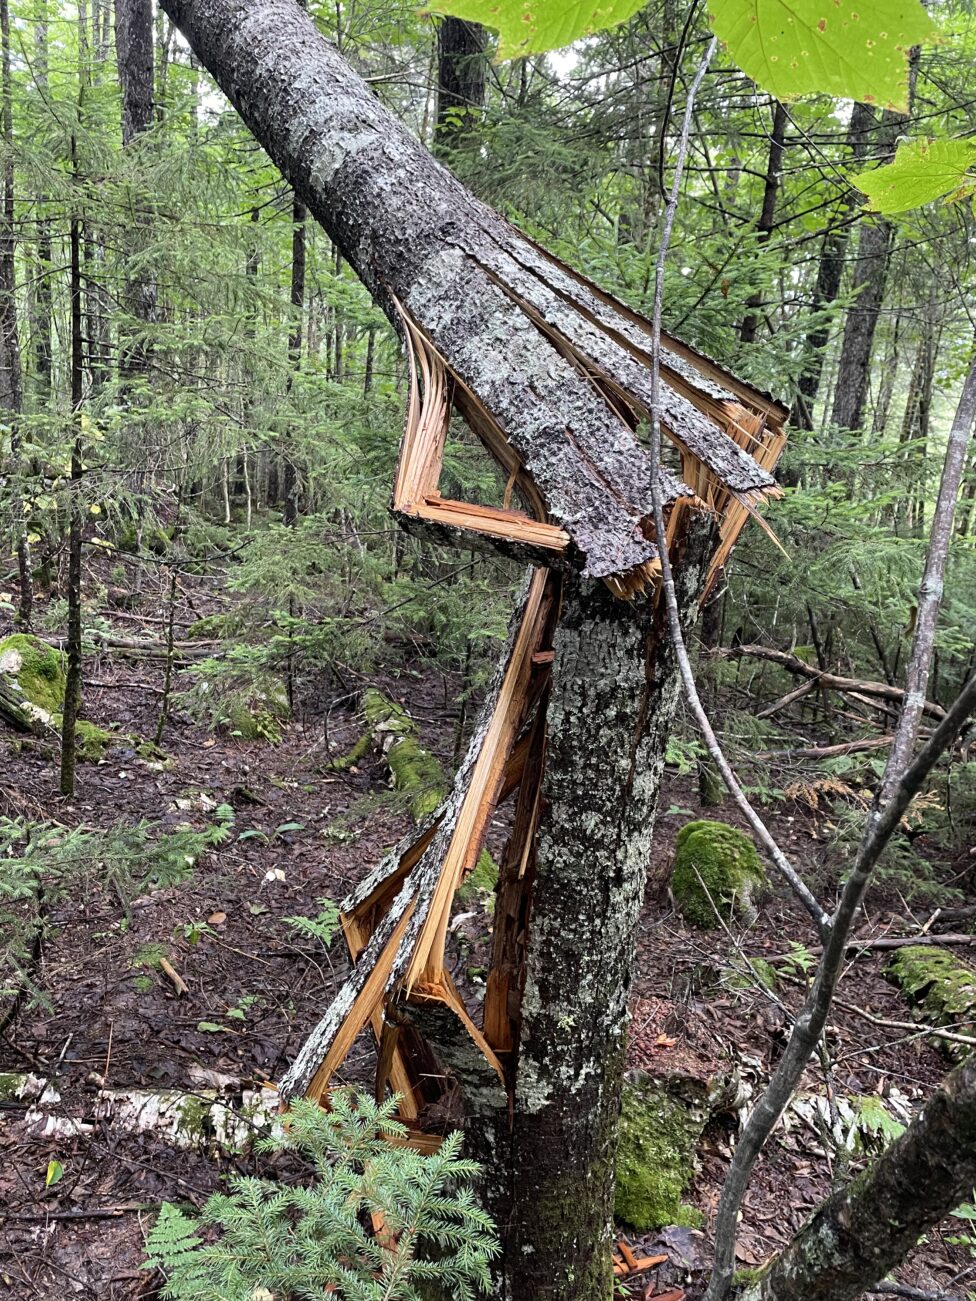 A tree collapses forward, breaking at hard angles in a lush spruce forest